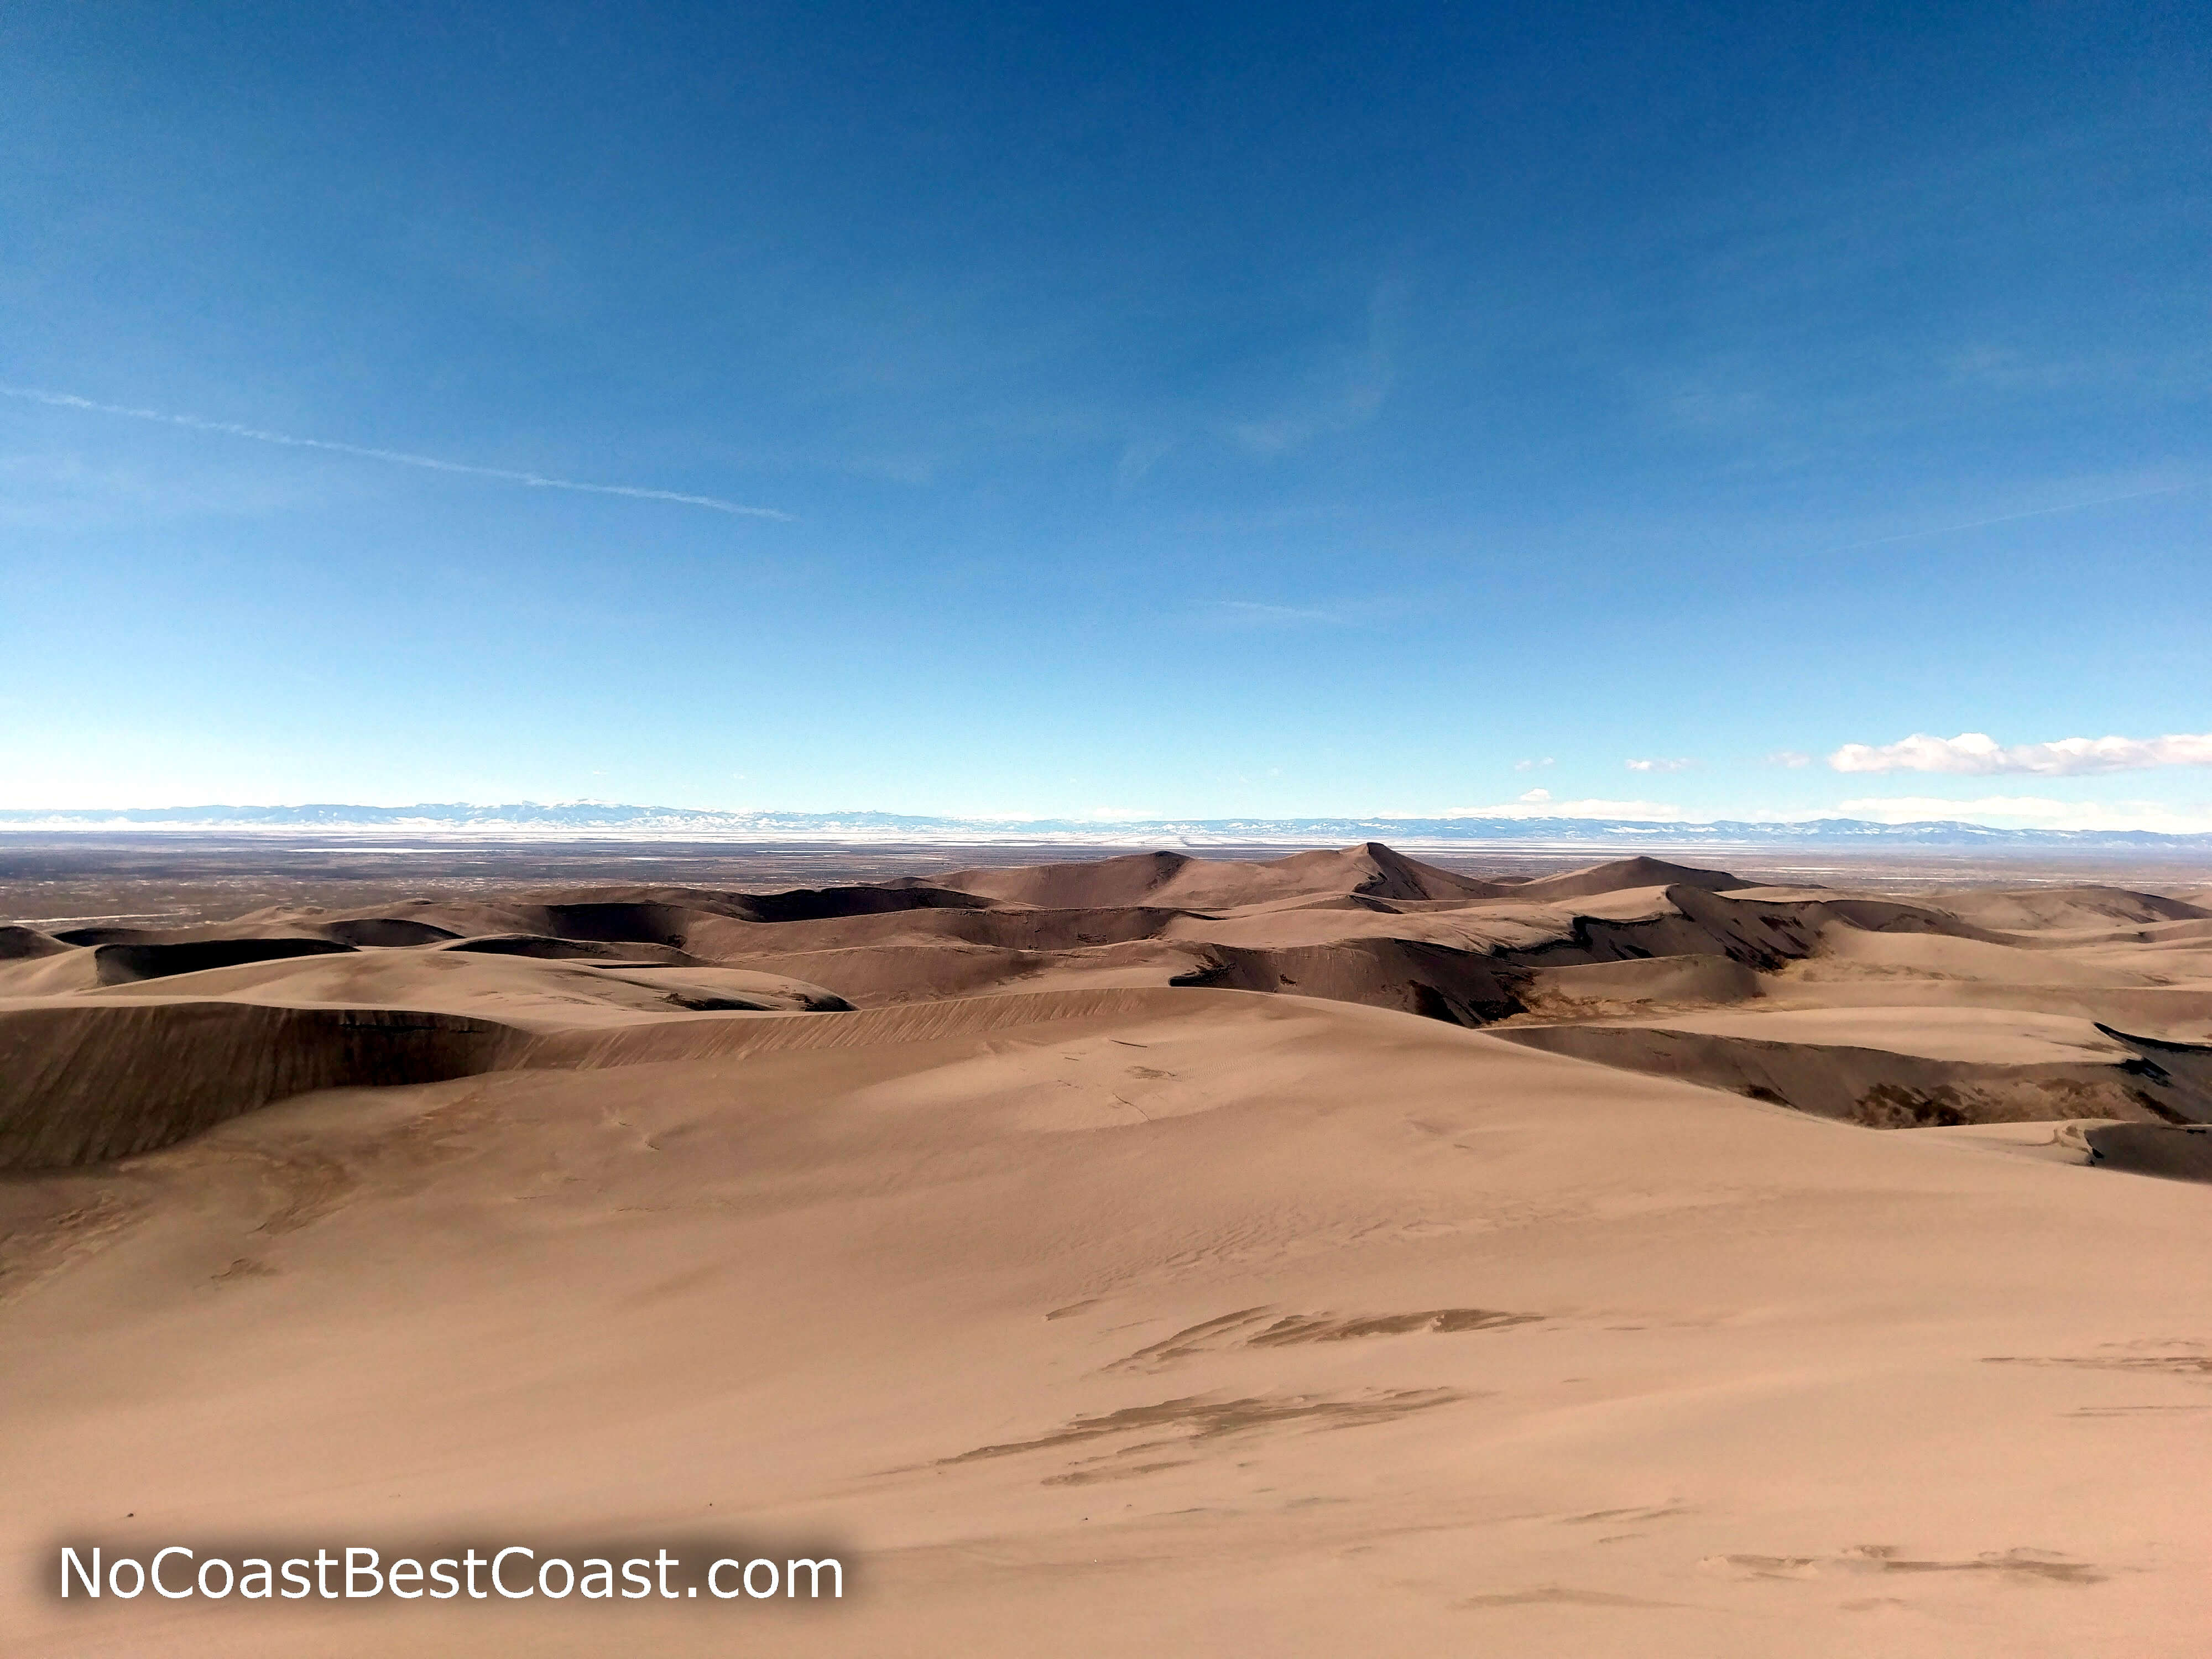 The view towards Alamosa from the top of High Dune